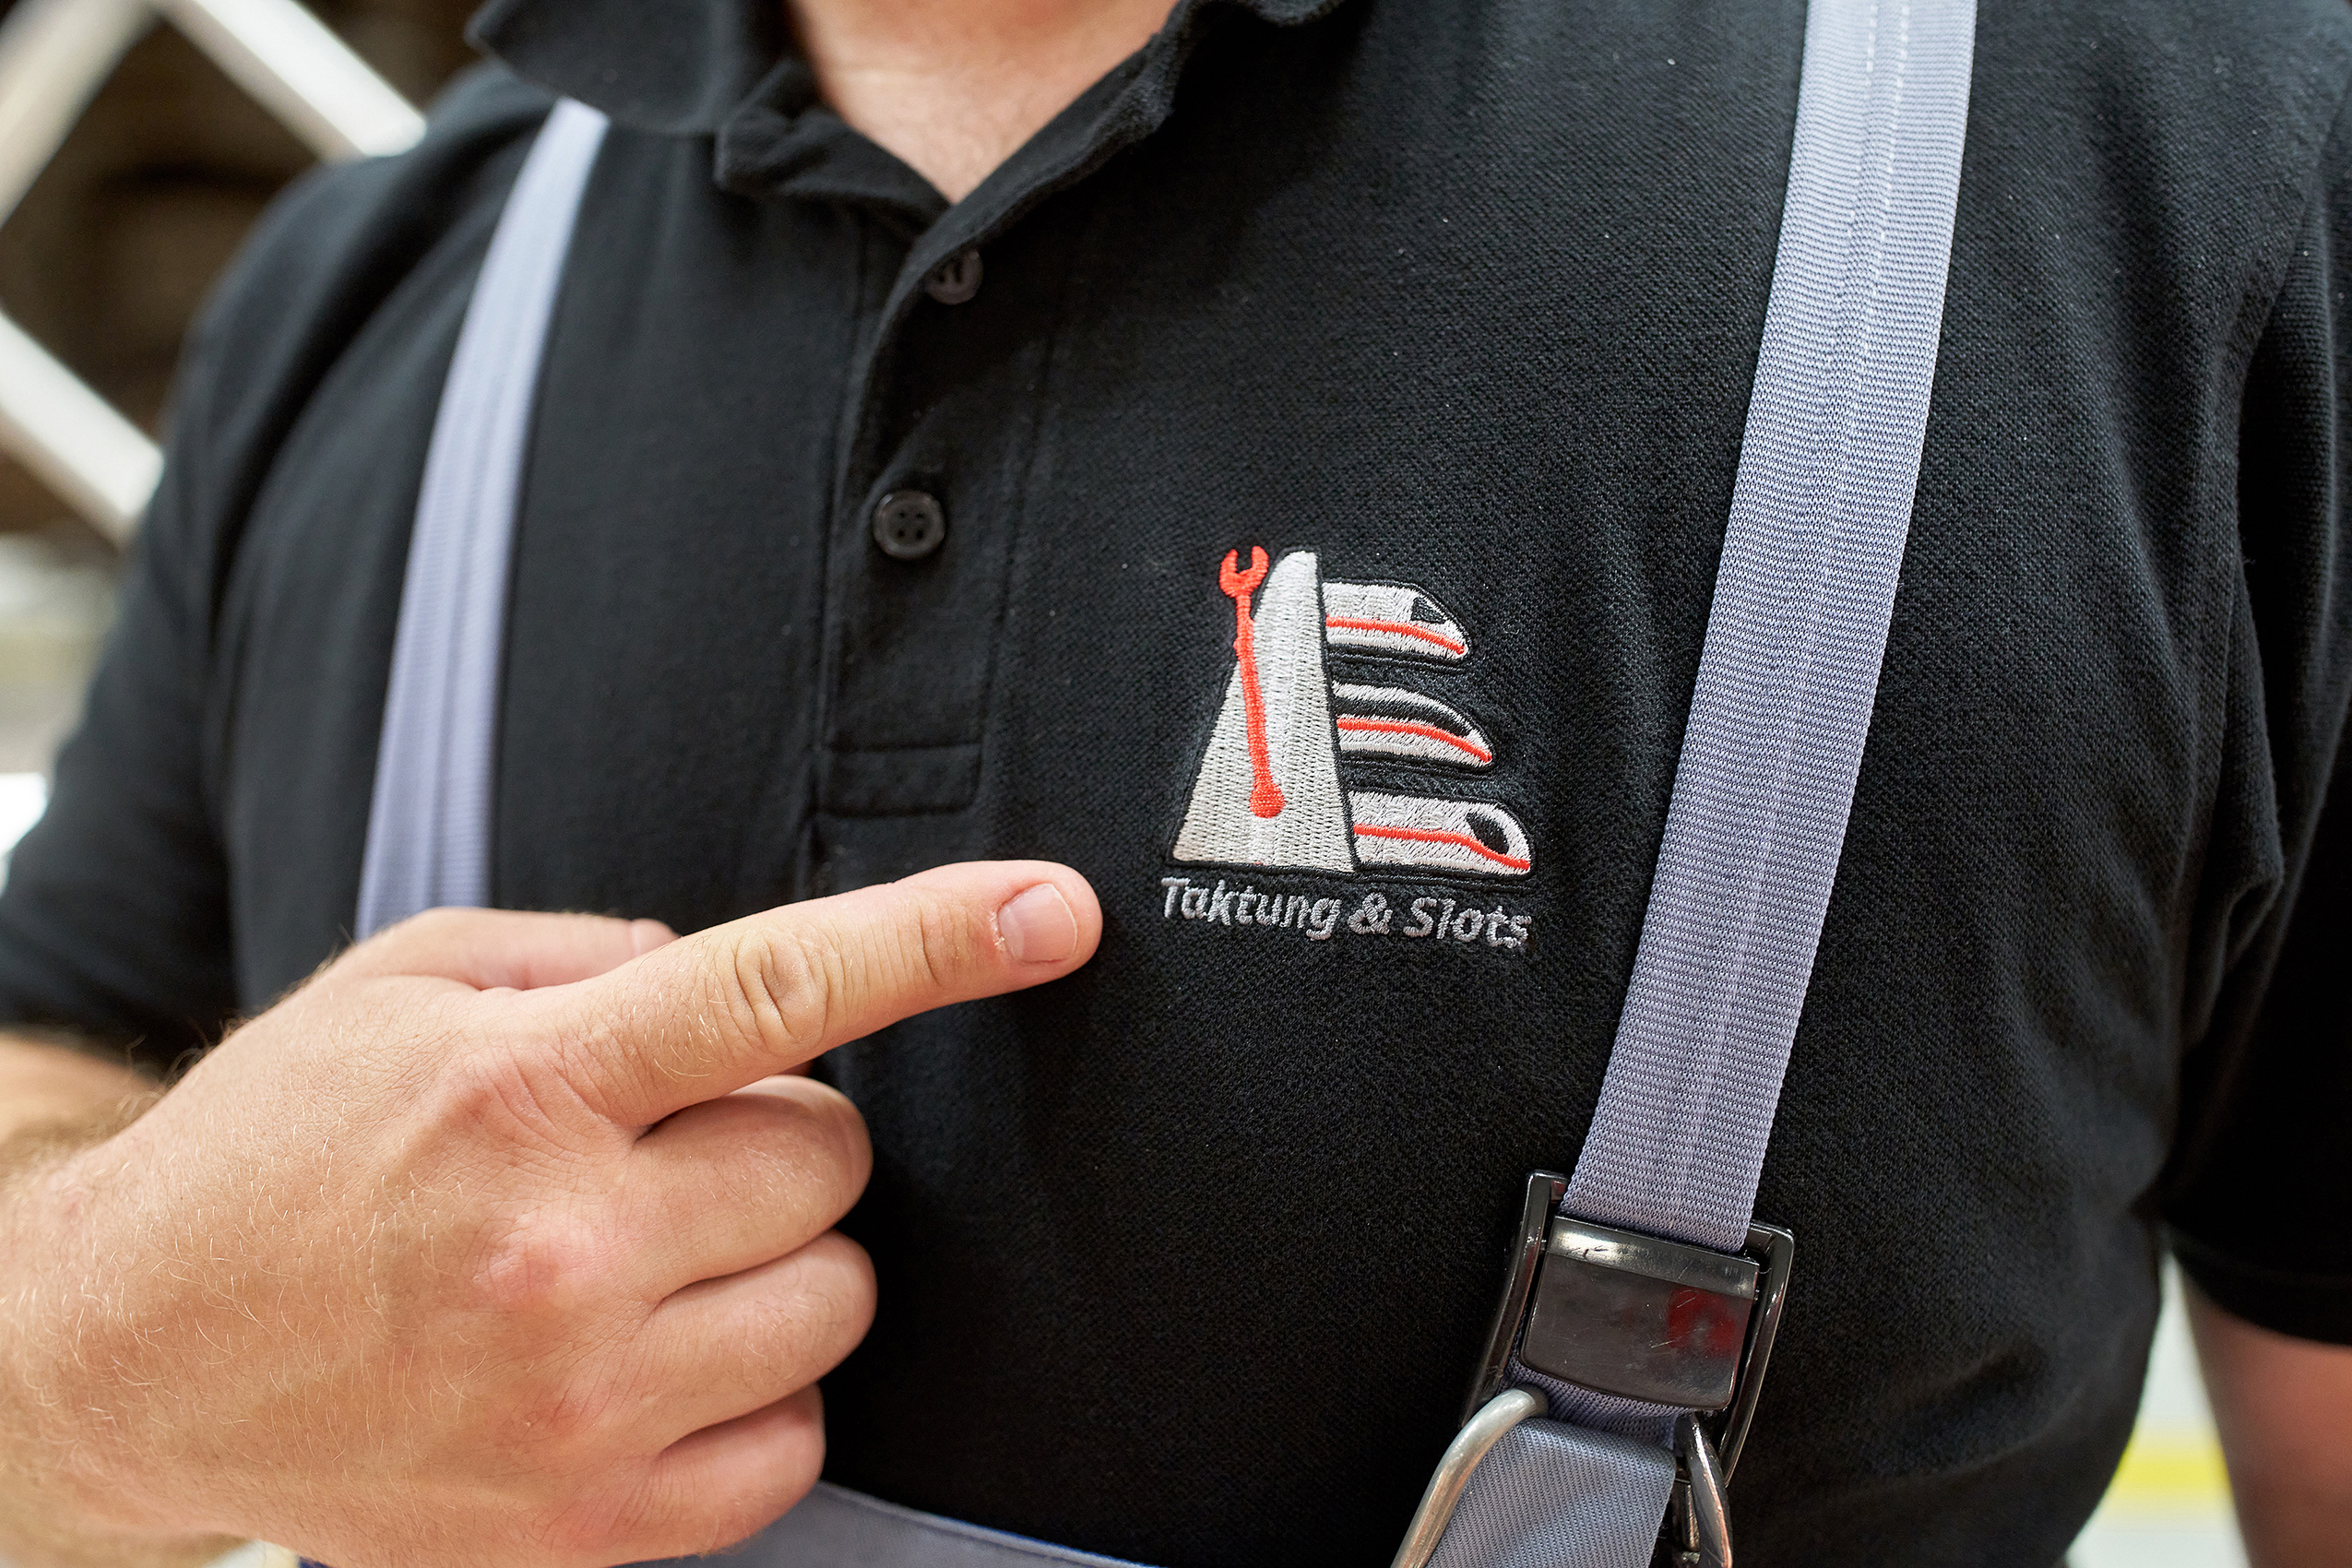 The principle is embroidered on the polo shirt: precise intervals and slots help the night shift keep more trains in good shape.